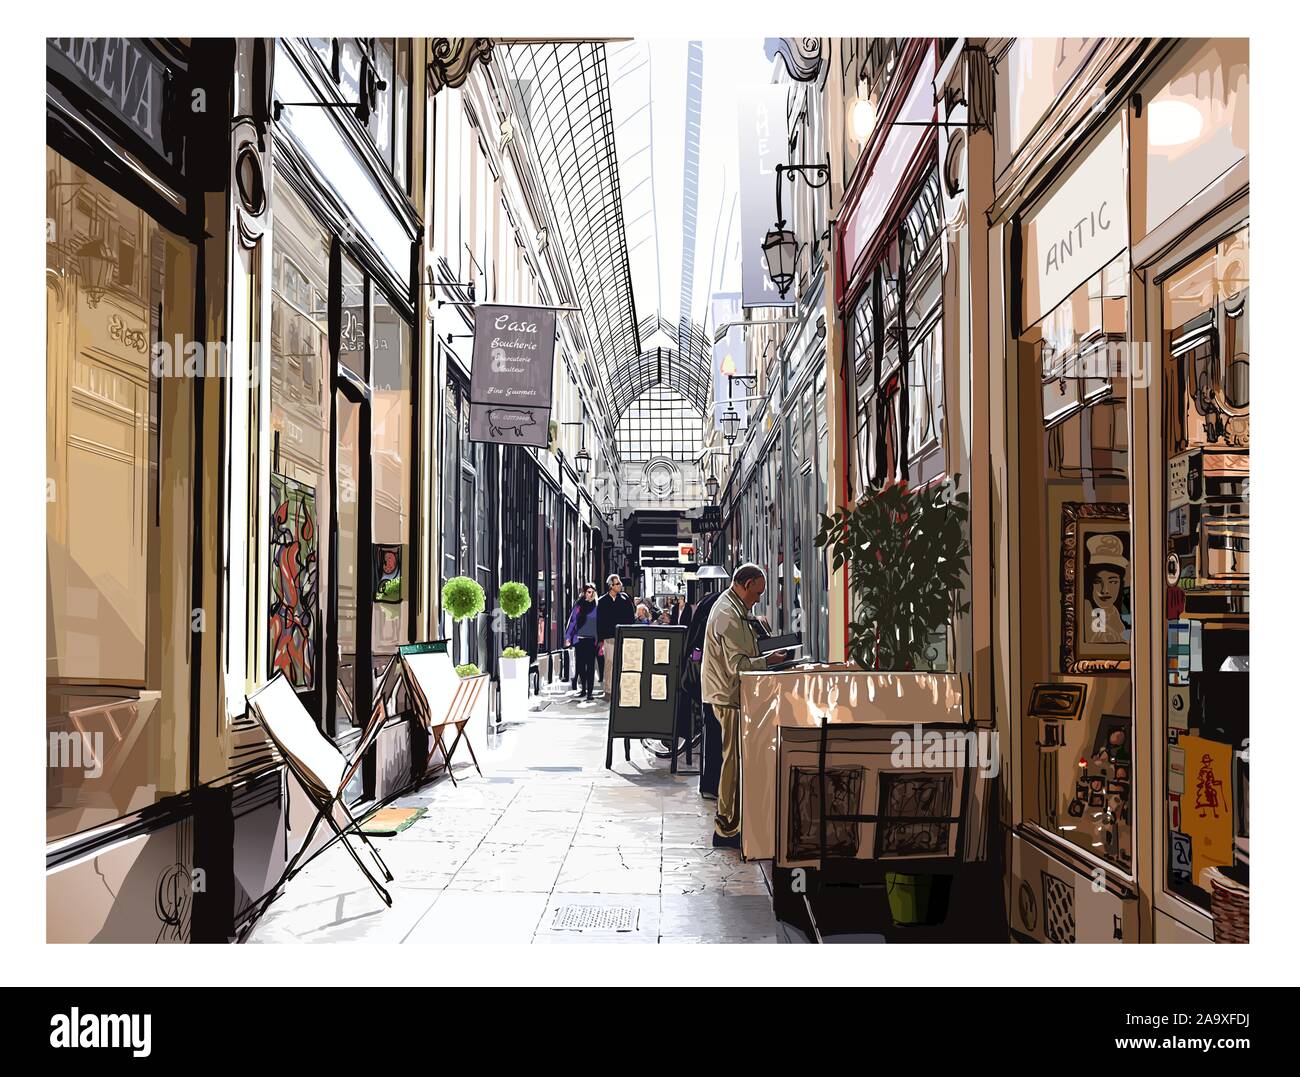 Covered arcade in Paris - vector illustration (Ideal for printing on fabric or paper, poster or wallpaper, house decoration) all ads are fictitious Stock Vector